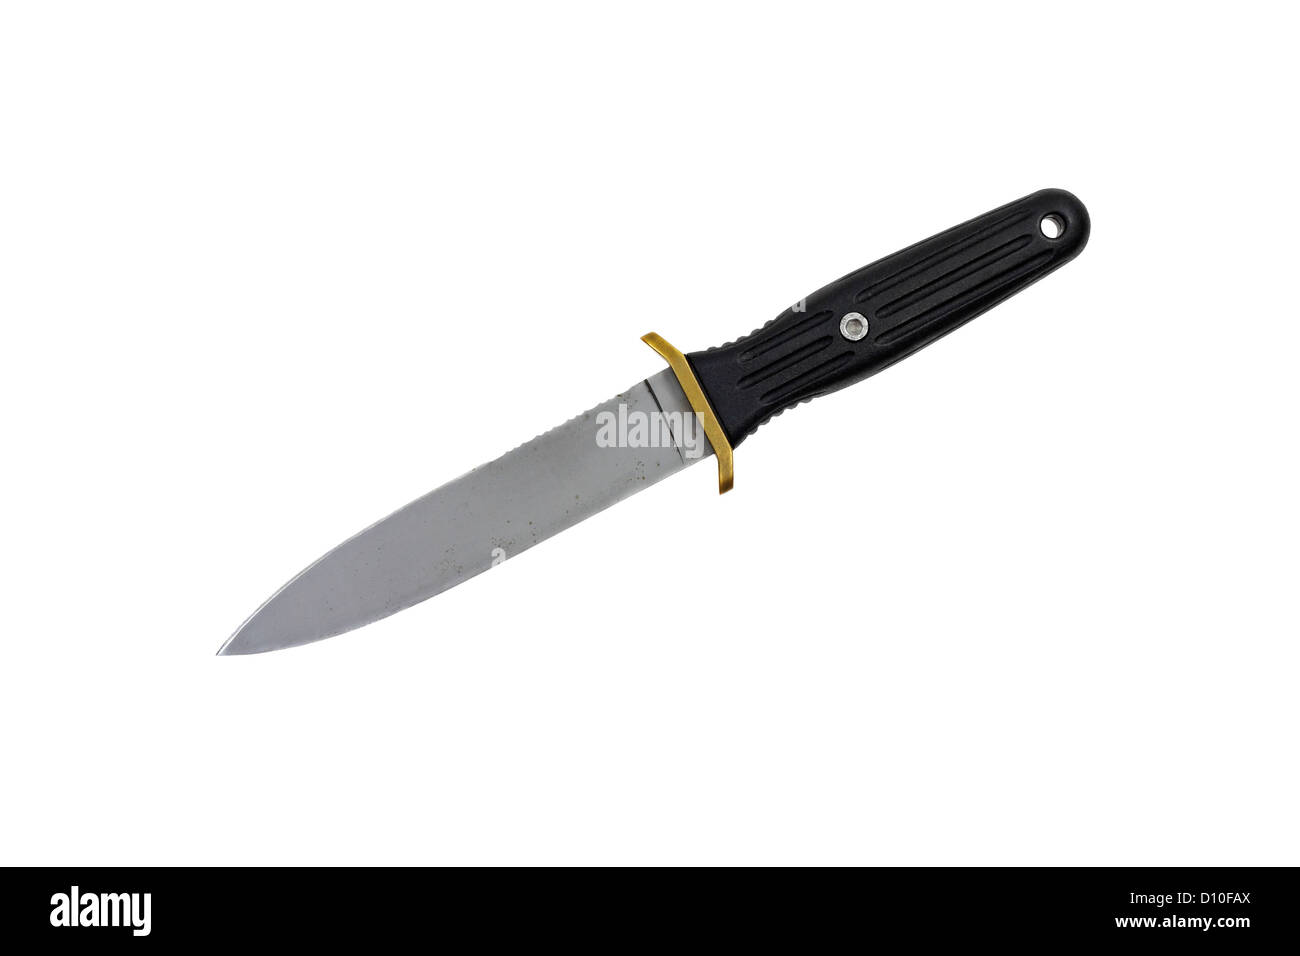 Hunting knife with a gray blade isolated on white background Stock Photo